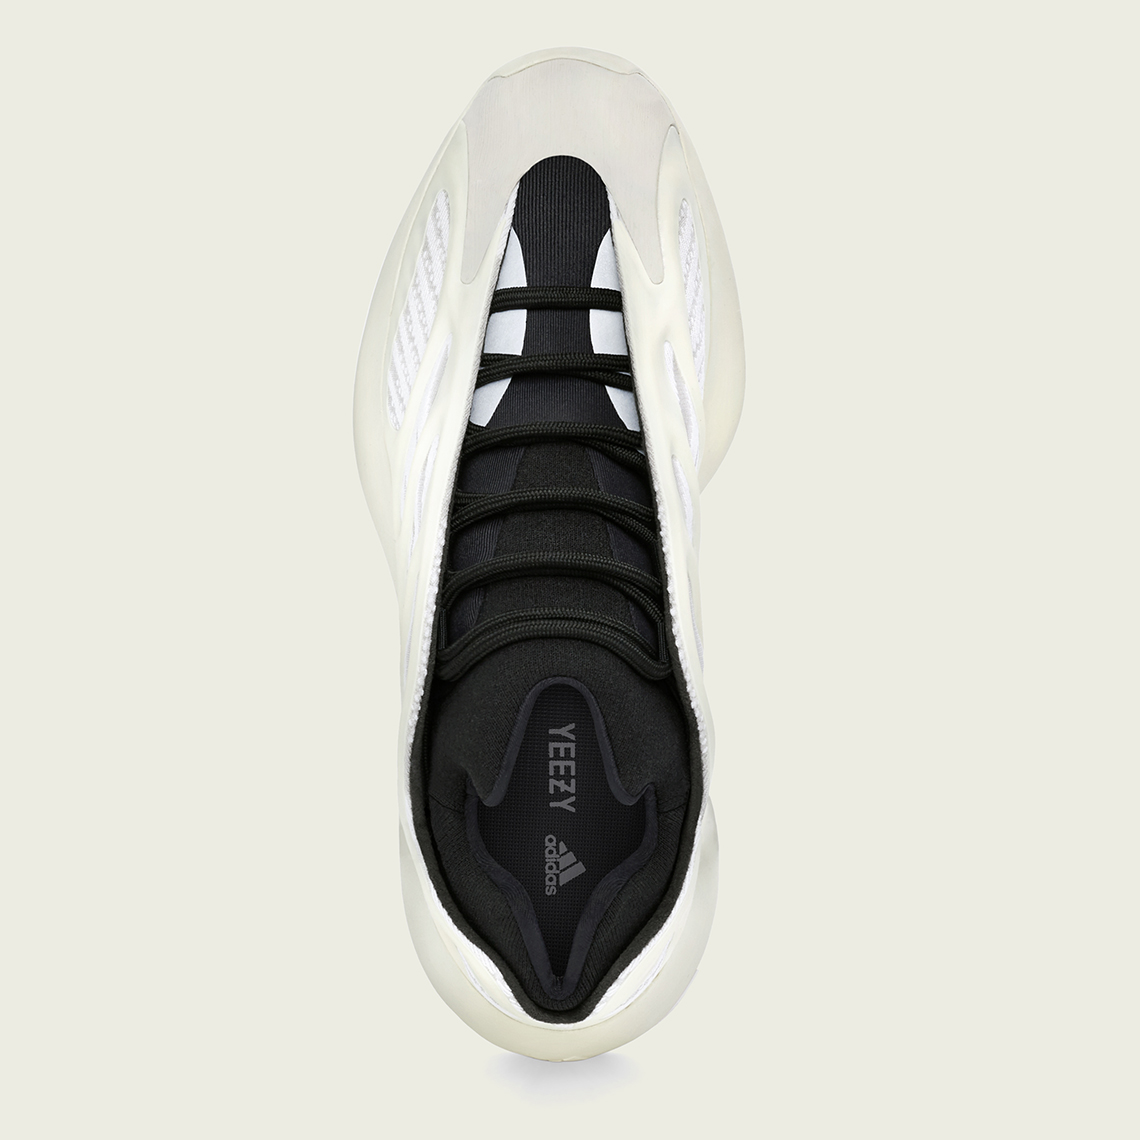 adidas yeezy 700 v3 azael official images 2